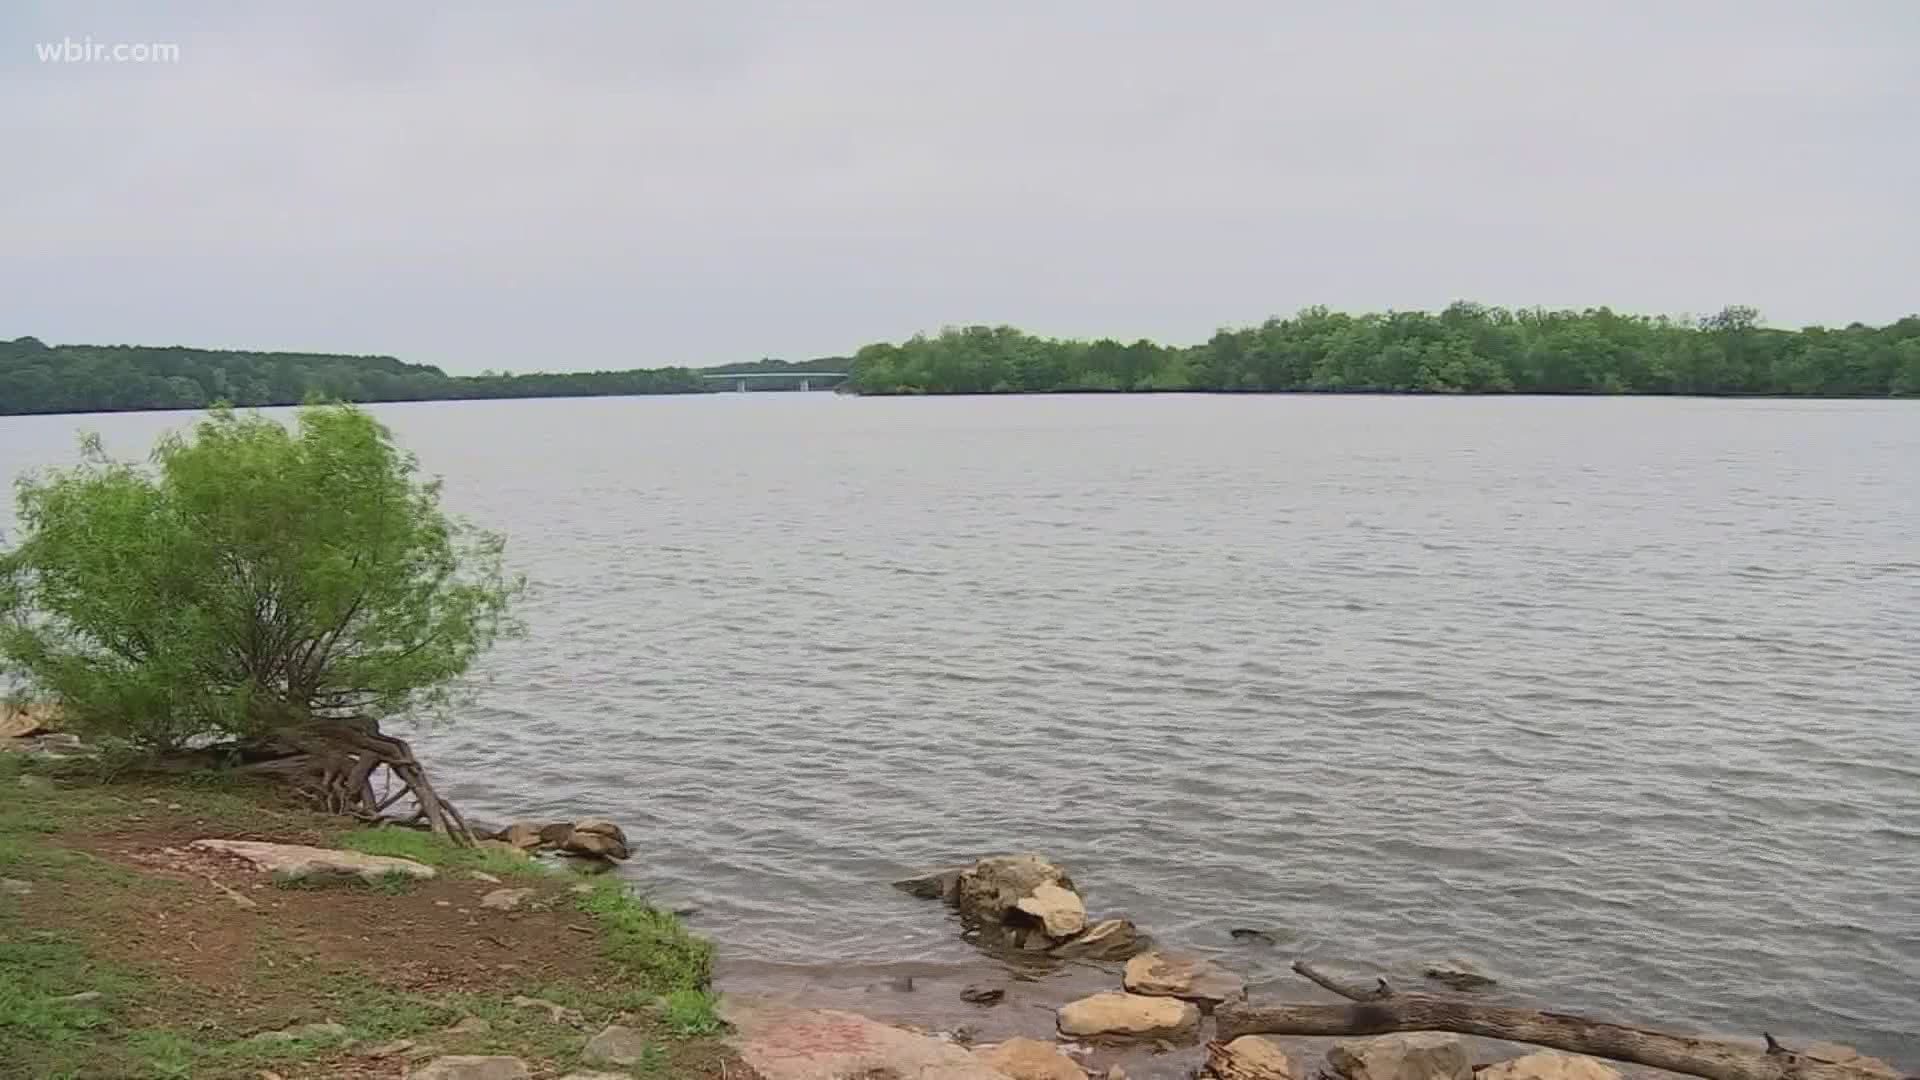 Authorities have recovered remains after a weekend plane crash into a Smyrna area lake.